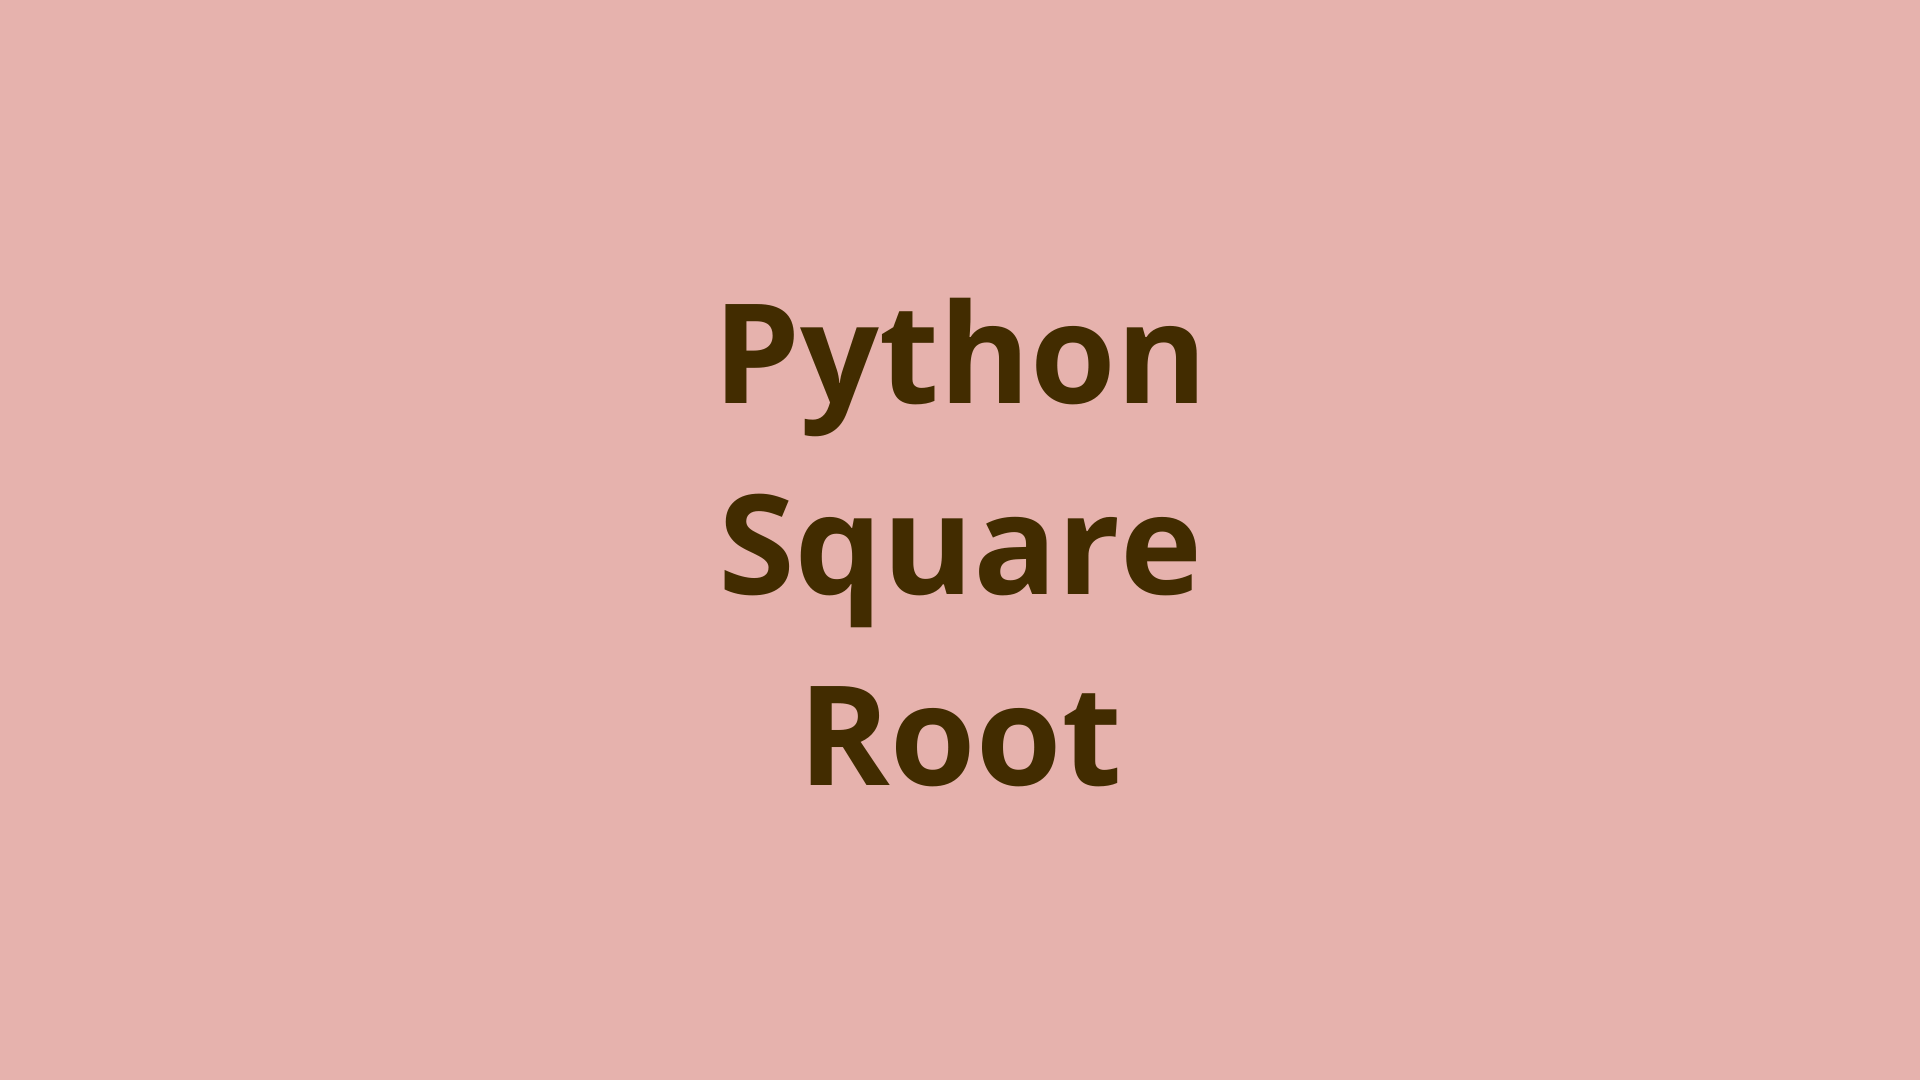 Image of Python Square Root